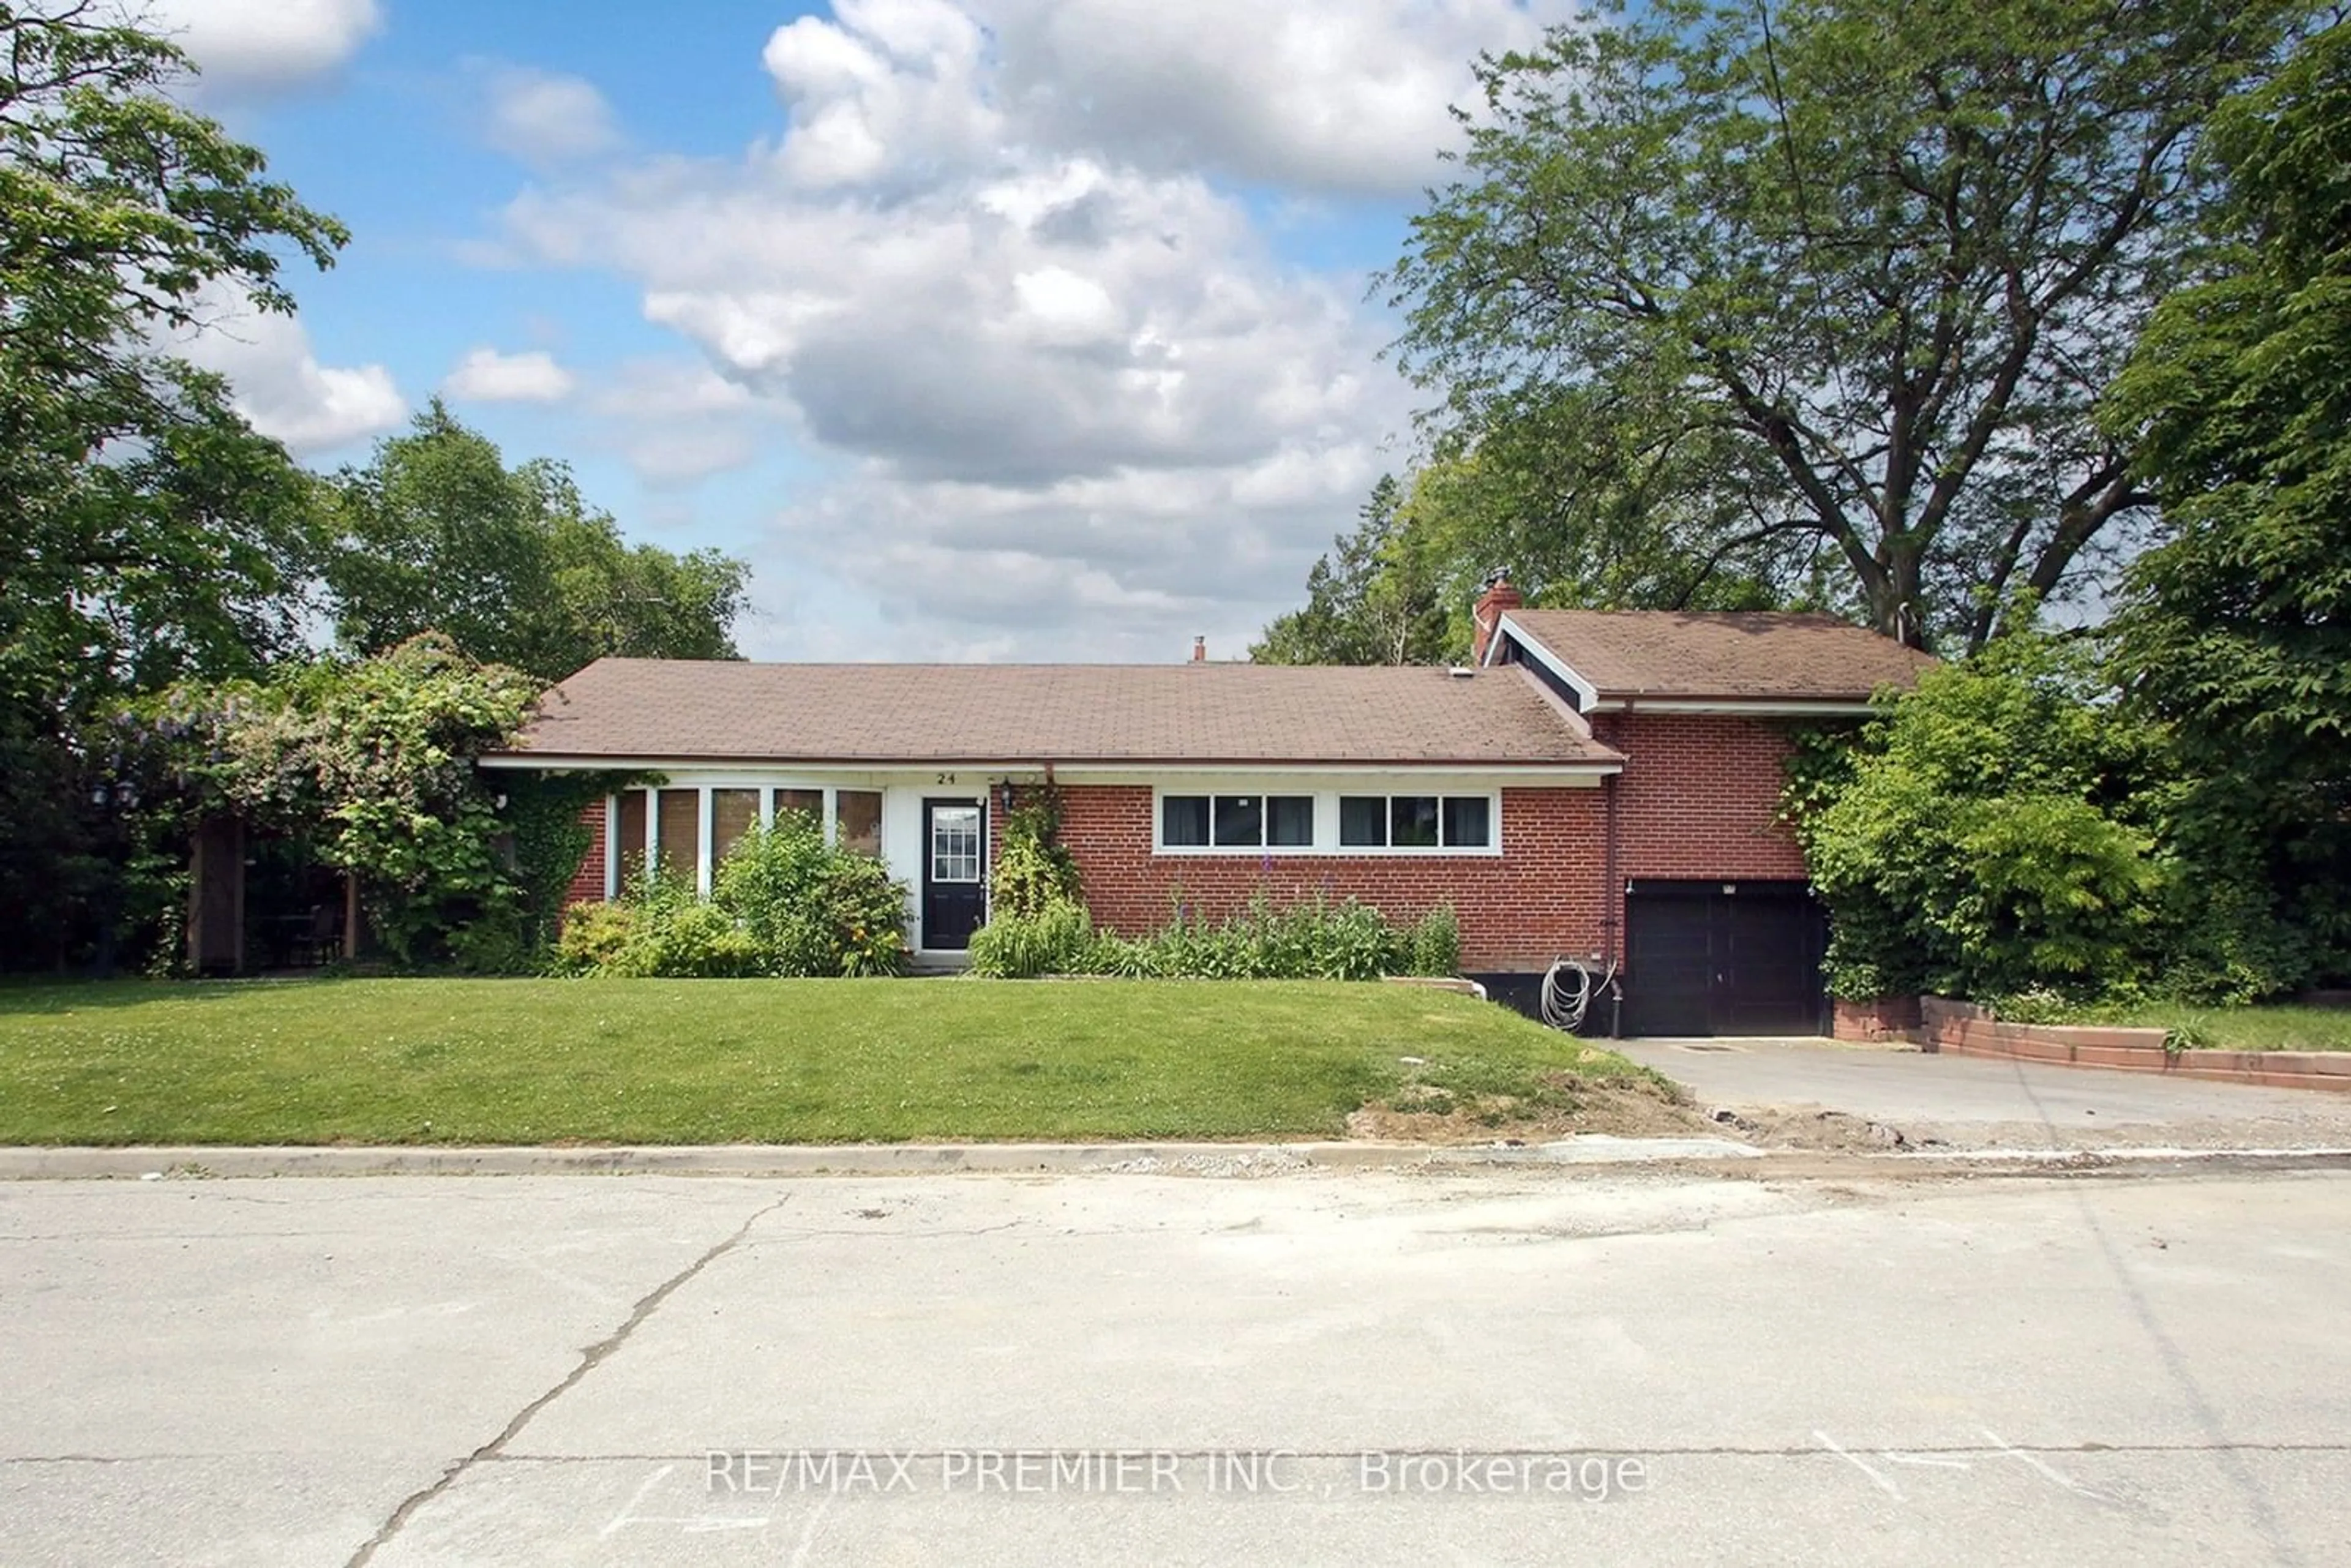 Frontside or backside of a home for 24 Panmure Cres, Toronto Ontario M1K 4Y6